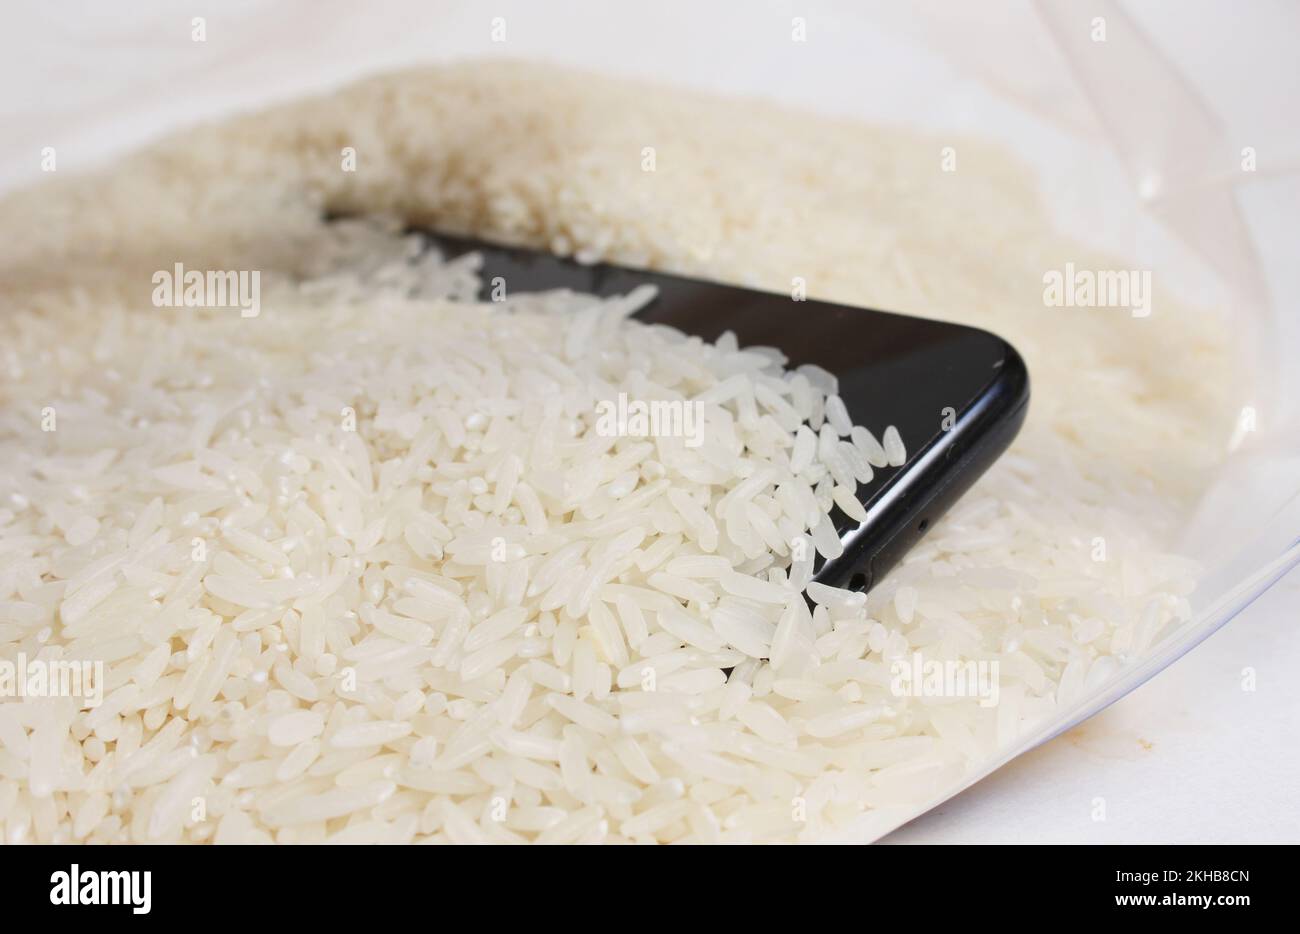 Smartphone in Bag of Rice to remove water from phone Stock Photo